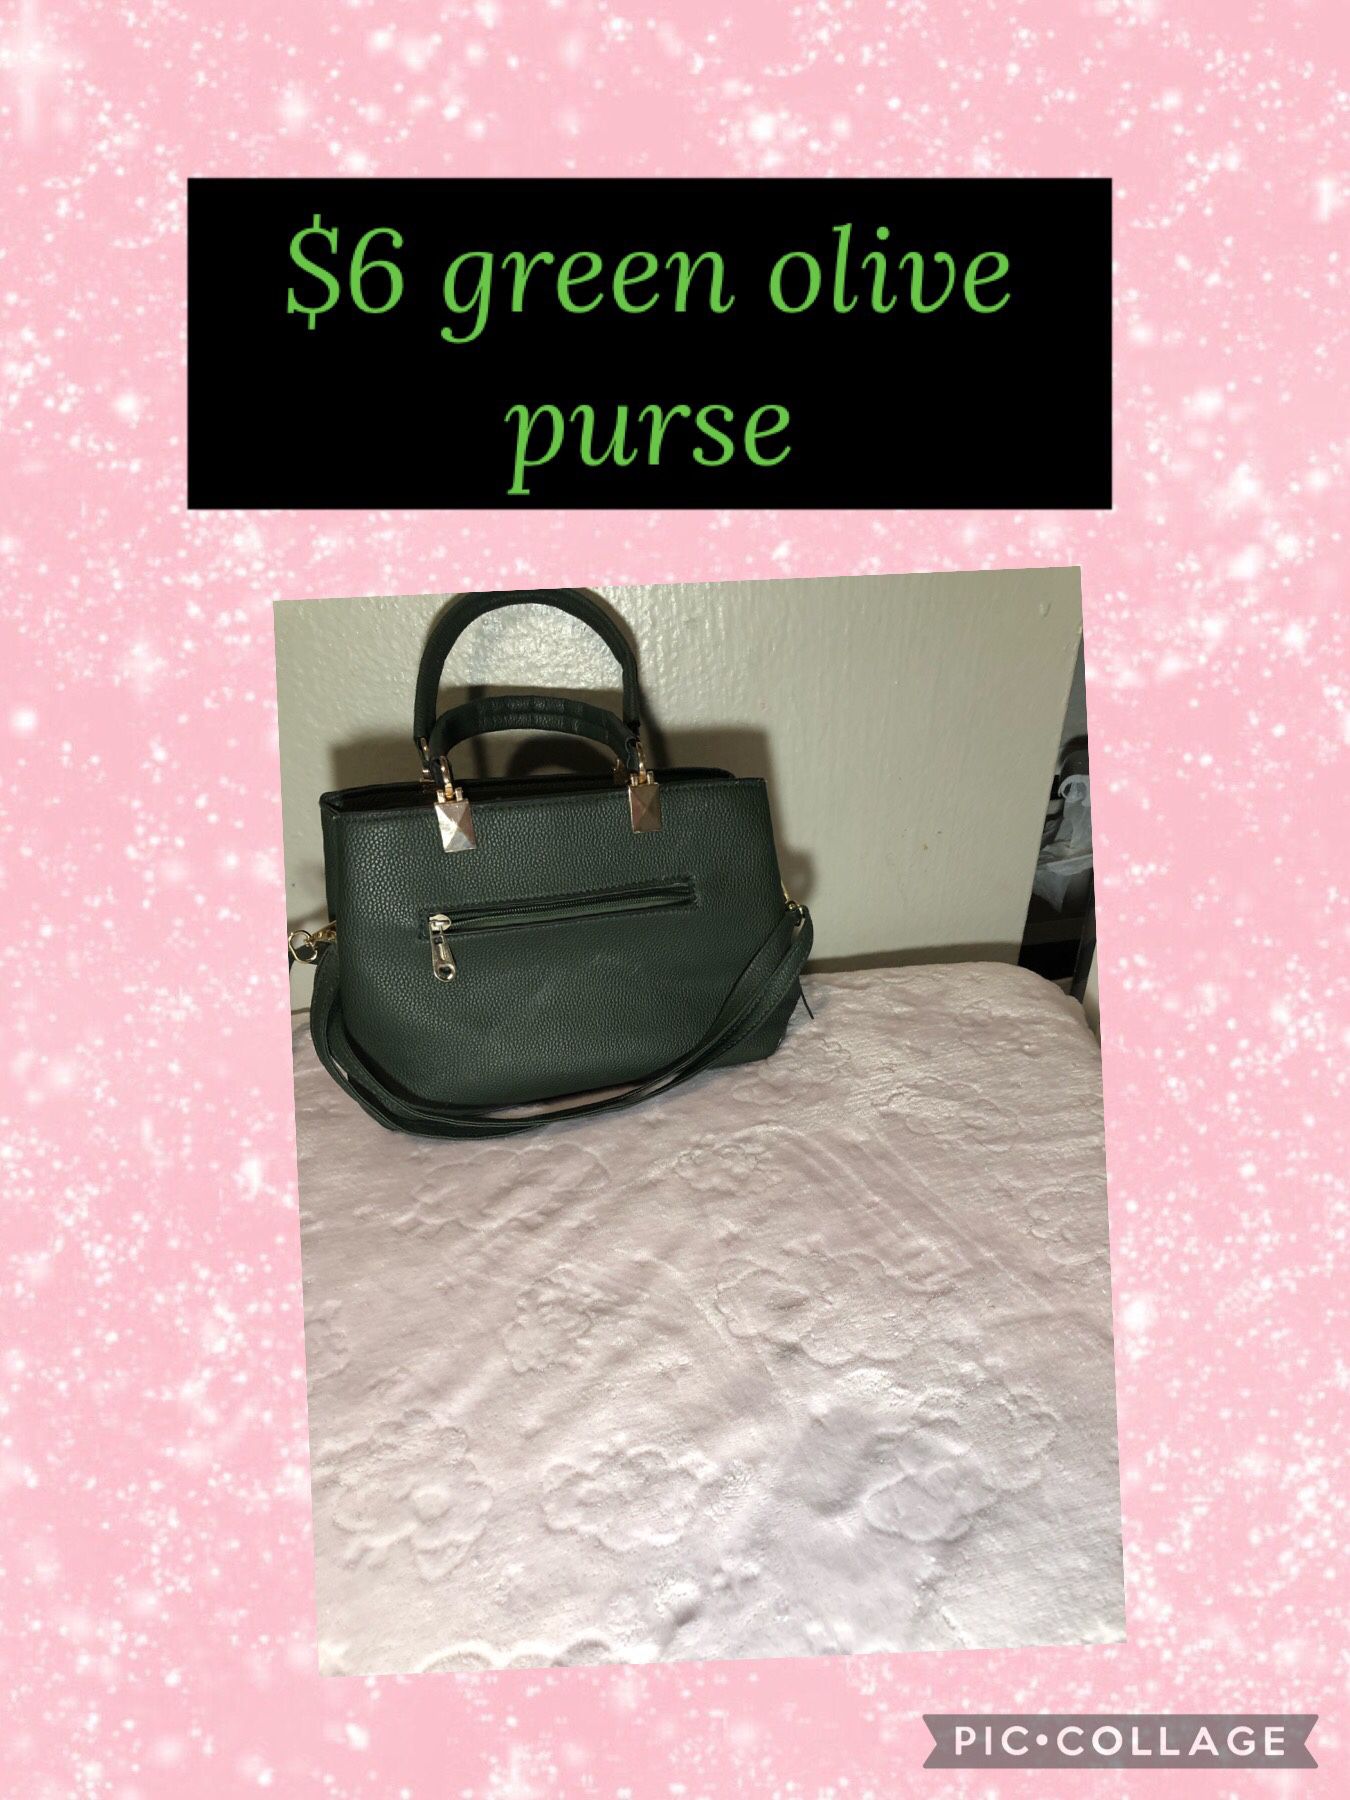 $6 Green Olive Purse 